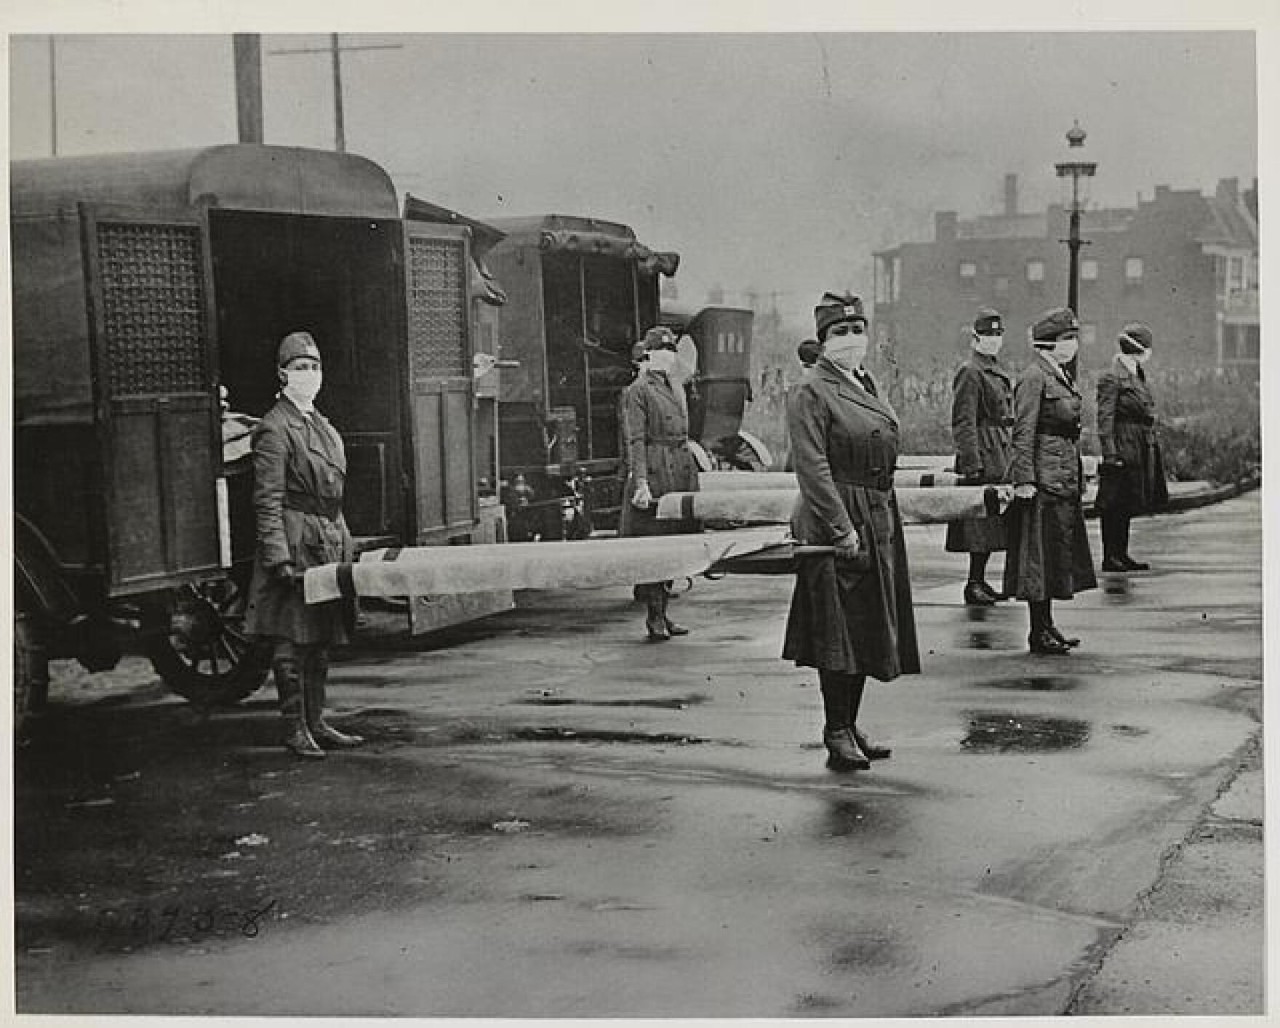 a photo of the St. Louis Red Cross Motor Corps on duty in Oct. 1918 during the influenza epidemic.